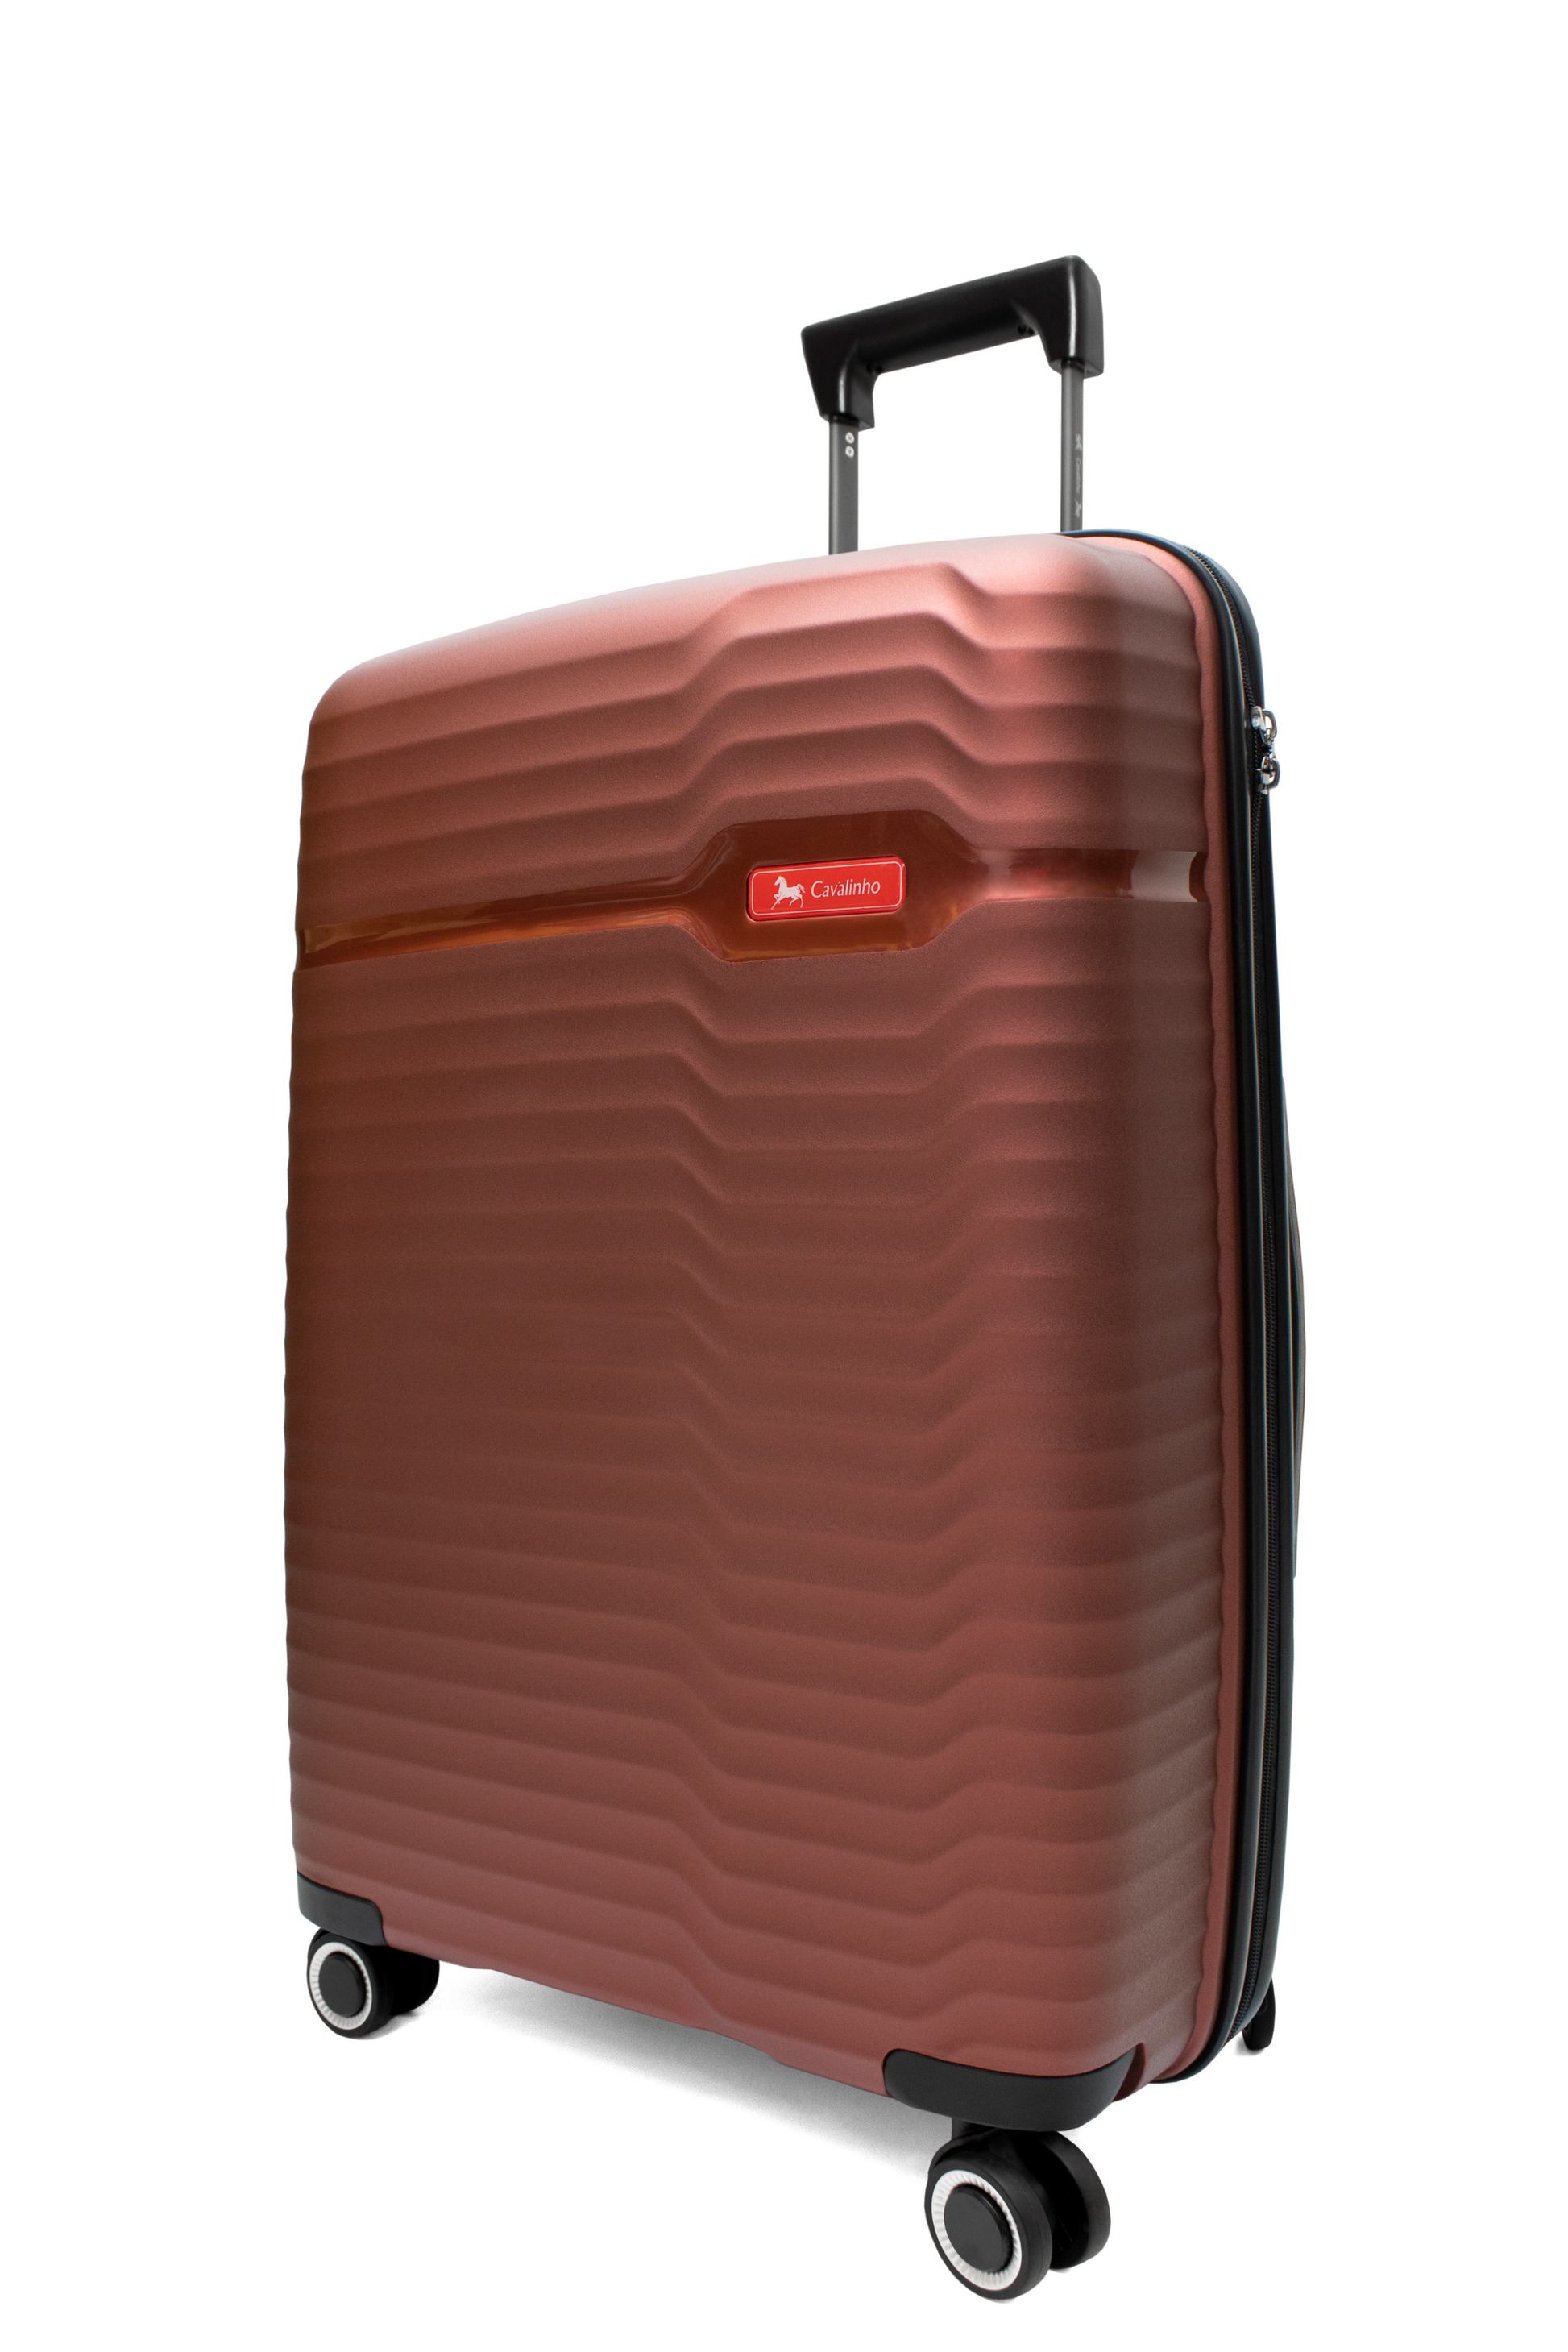 Cavalinho Check-in Hardside Luggage (24" or 28") - 24 inch IndianRed - 68010003.24.24_2